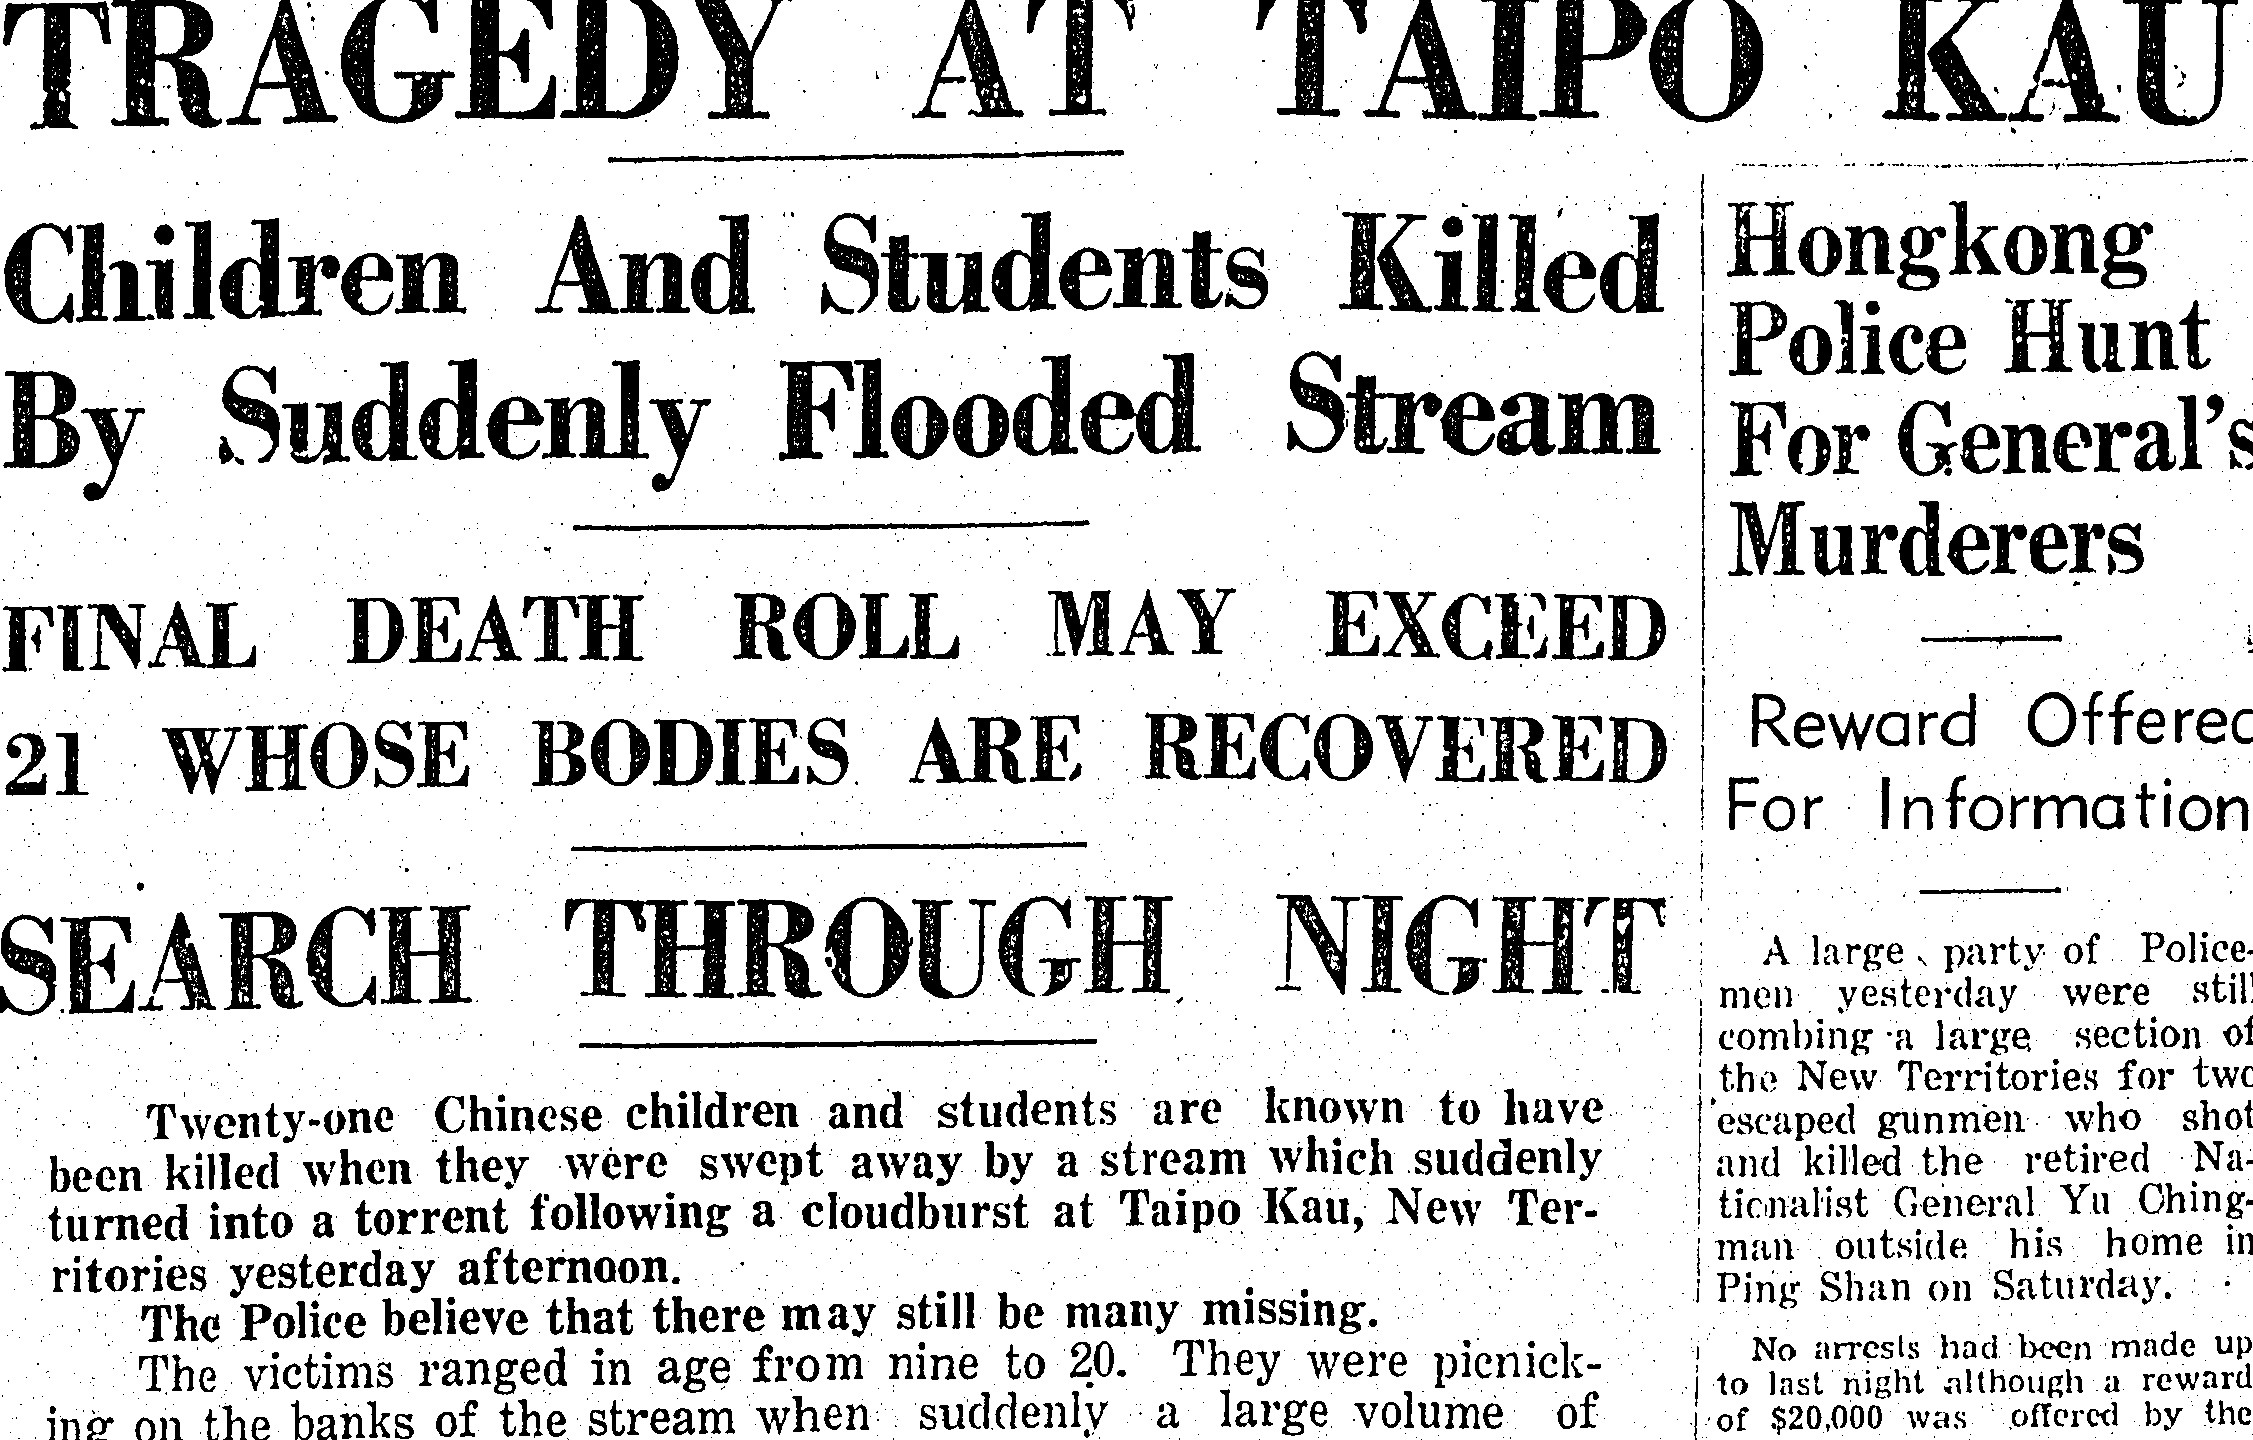 Groups from Kowloon-Canton Railway Staff Club and the St James’ Settlement, including many children, were enjoying a Sunday outing at Taipo Kau when calamity struck in 1955